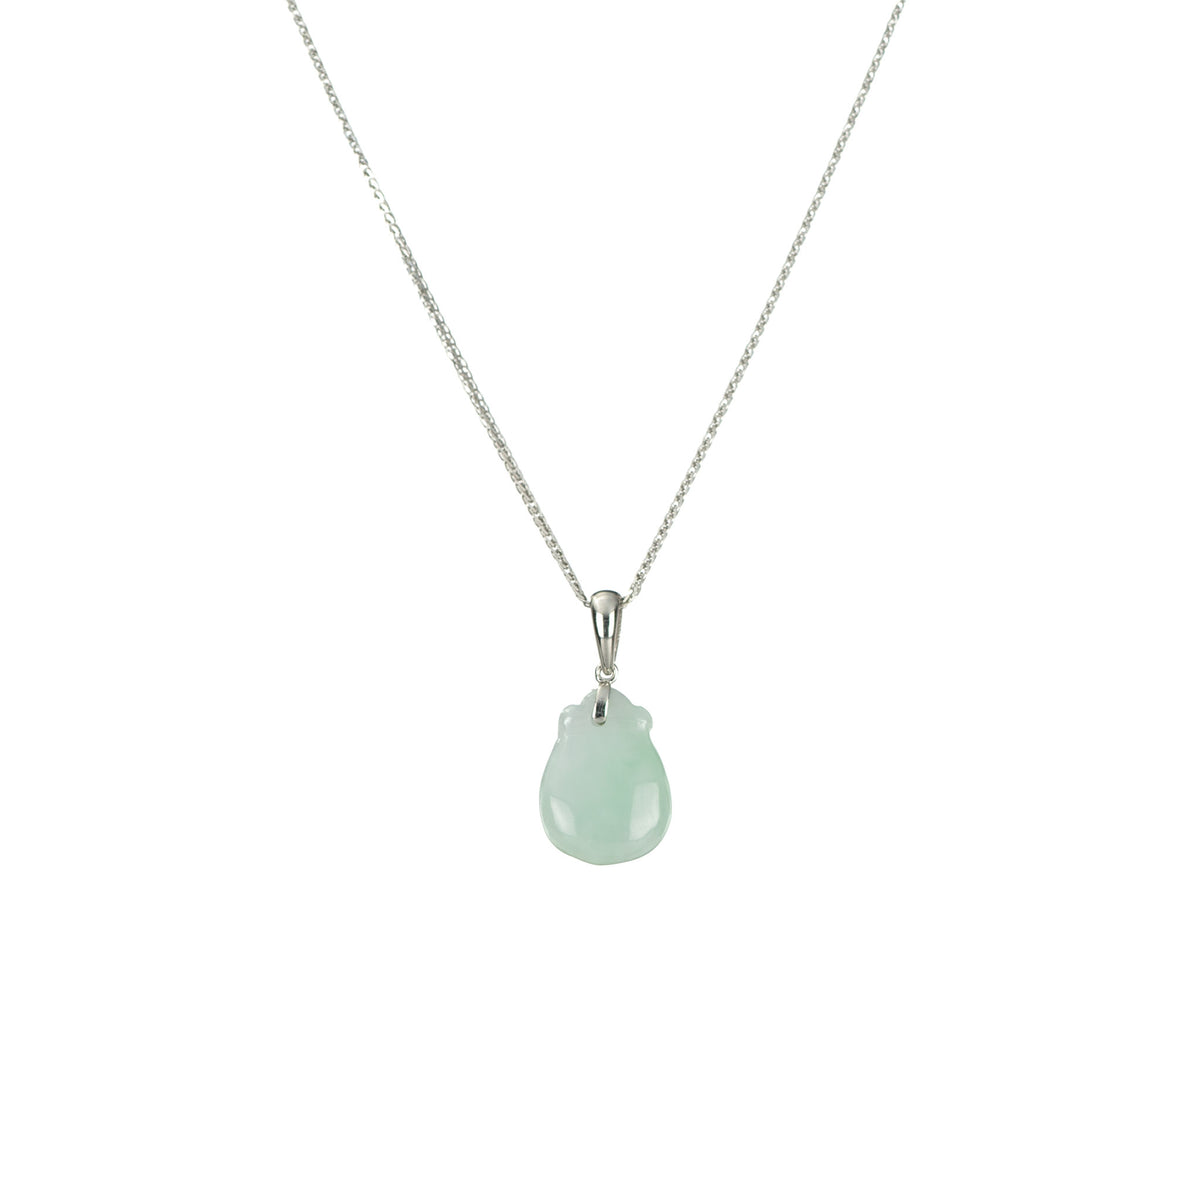 Petite Jade Purse Necklace with 18k White Gold